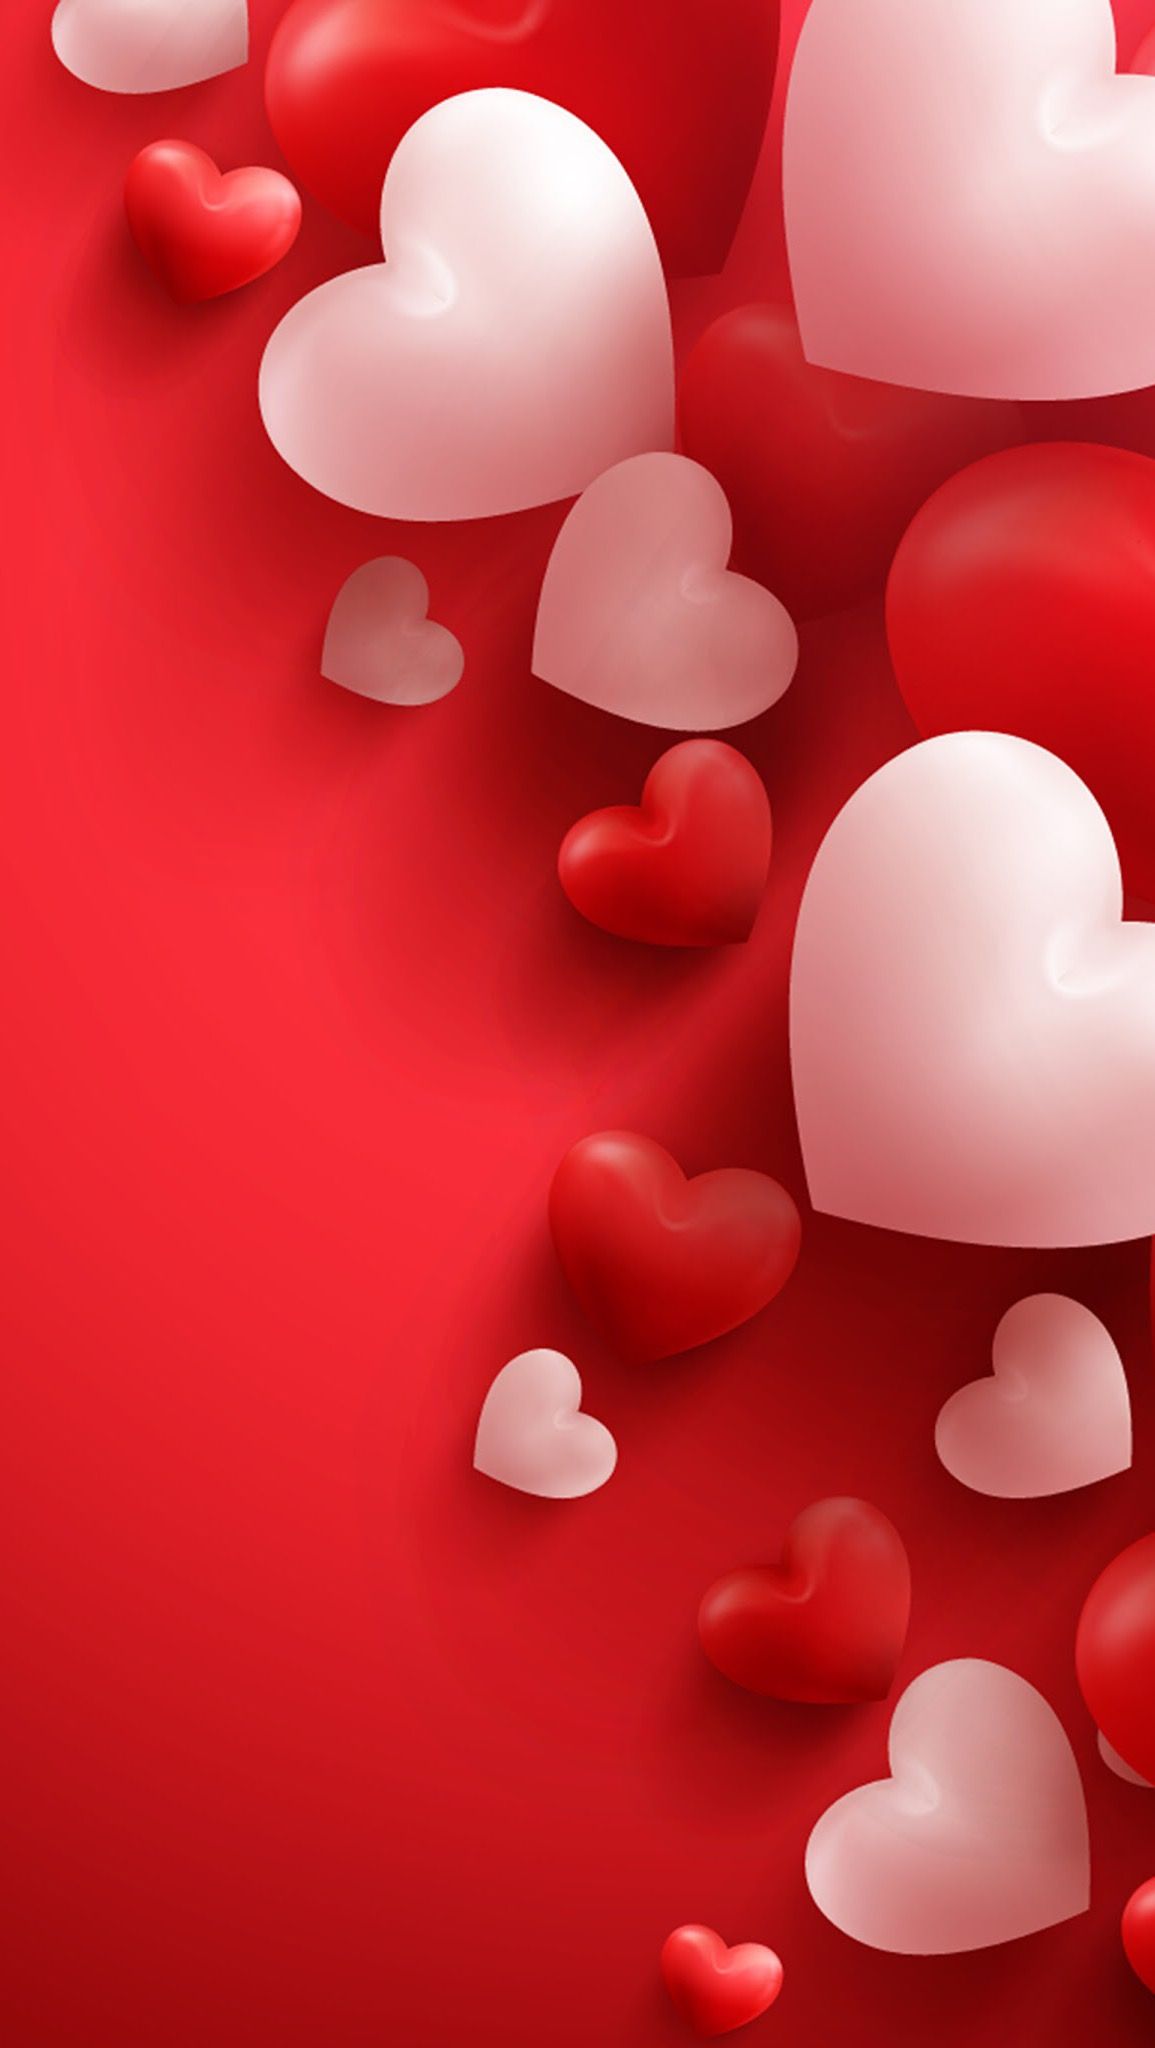 Love wallpaper images for download